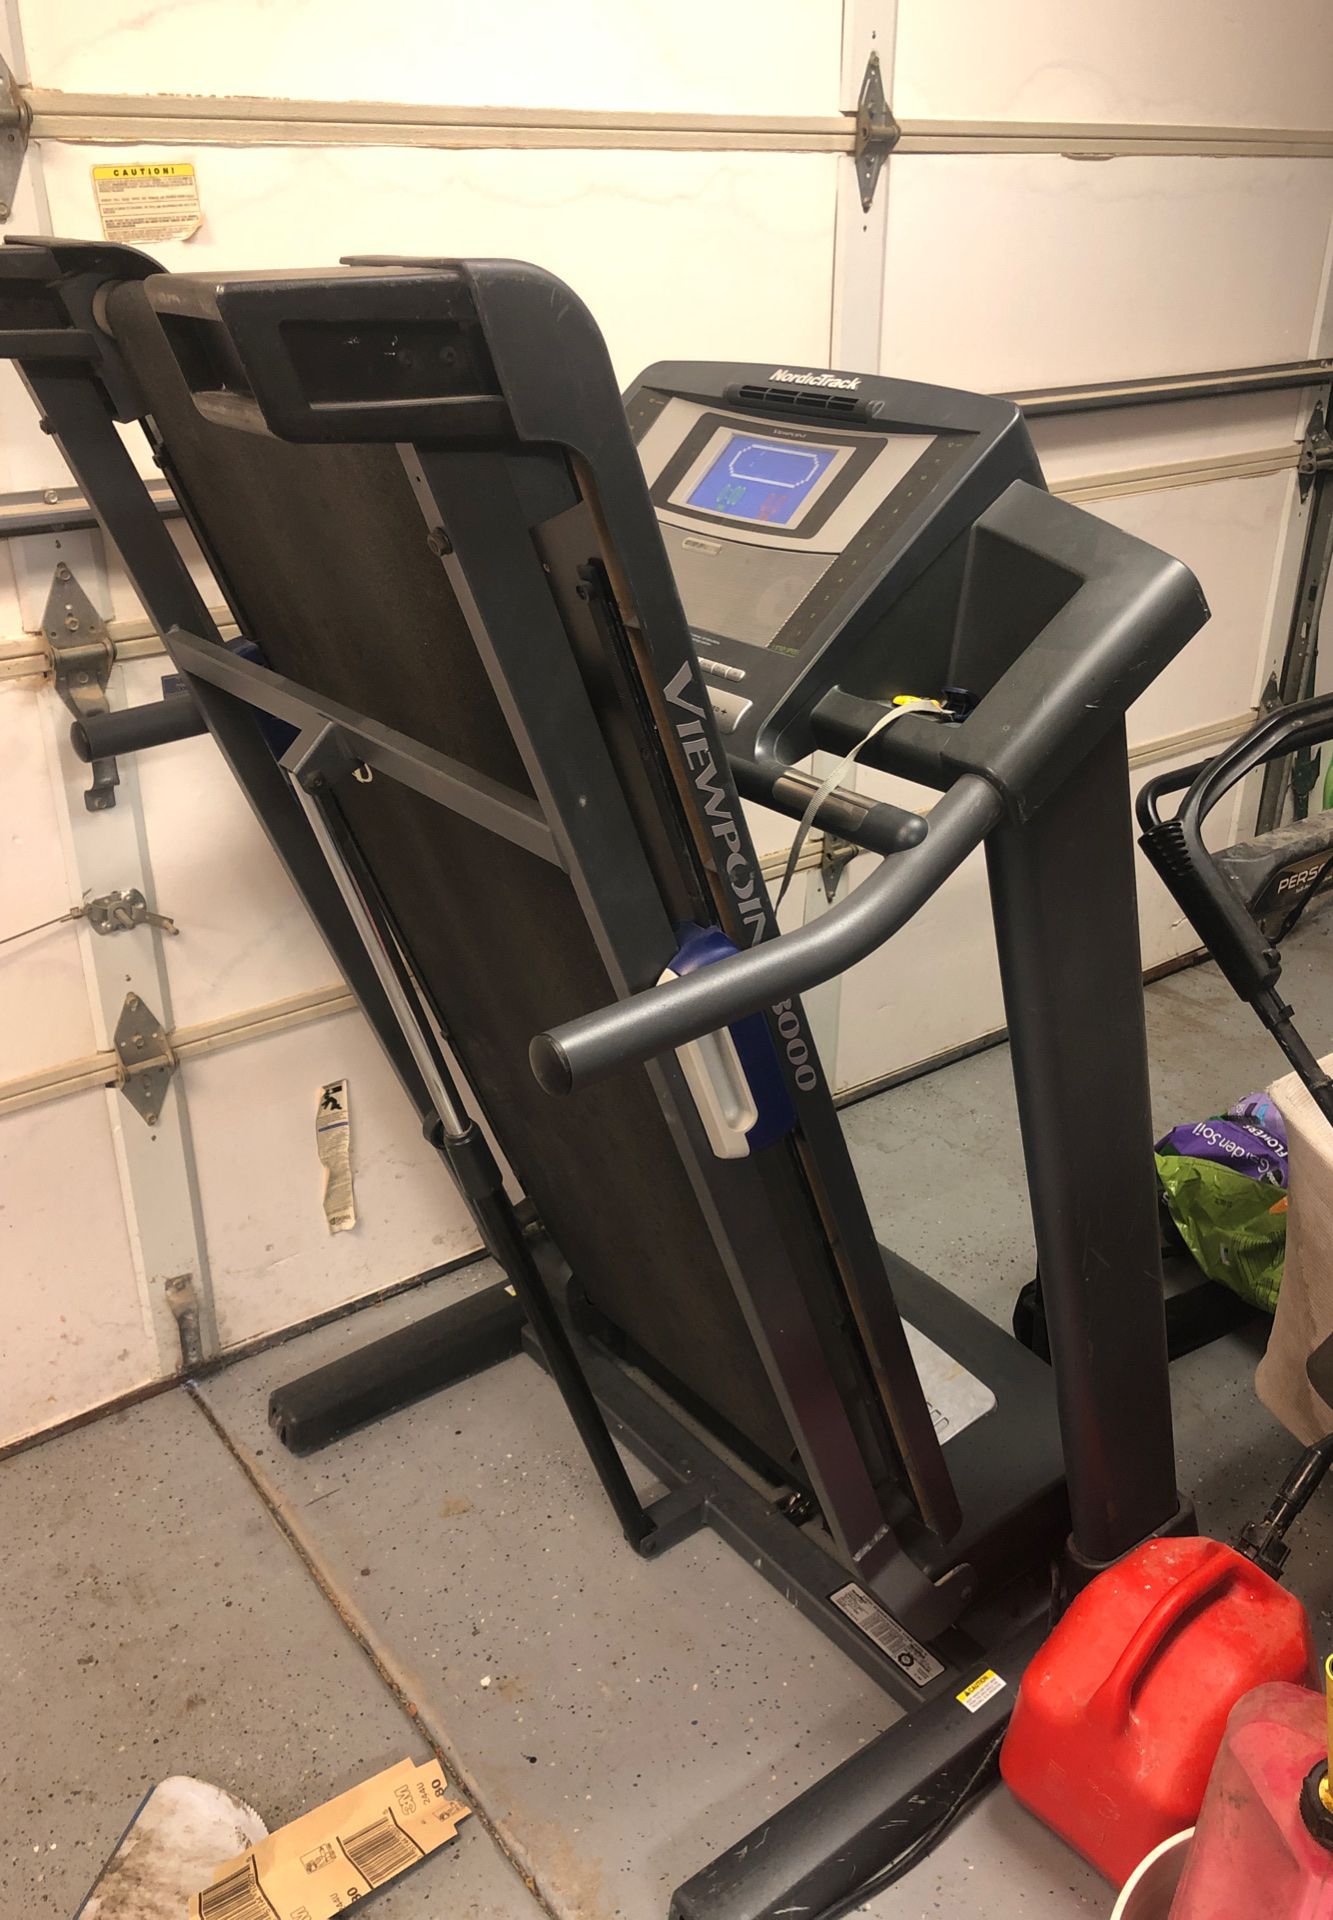 NordicTrack Viewpoint 3000 Treadmill